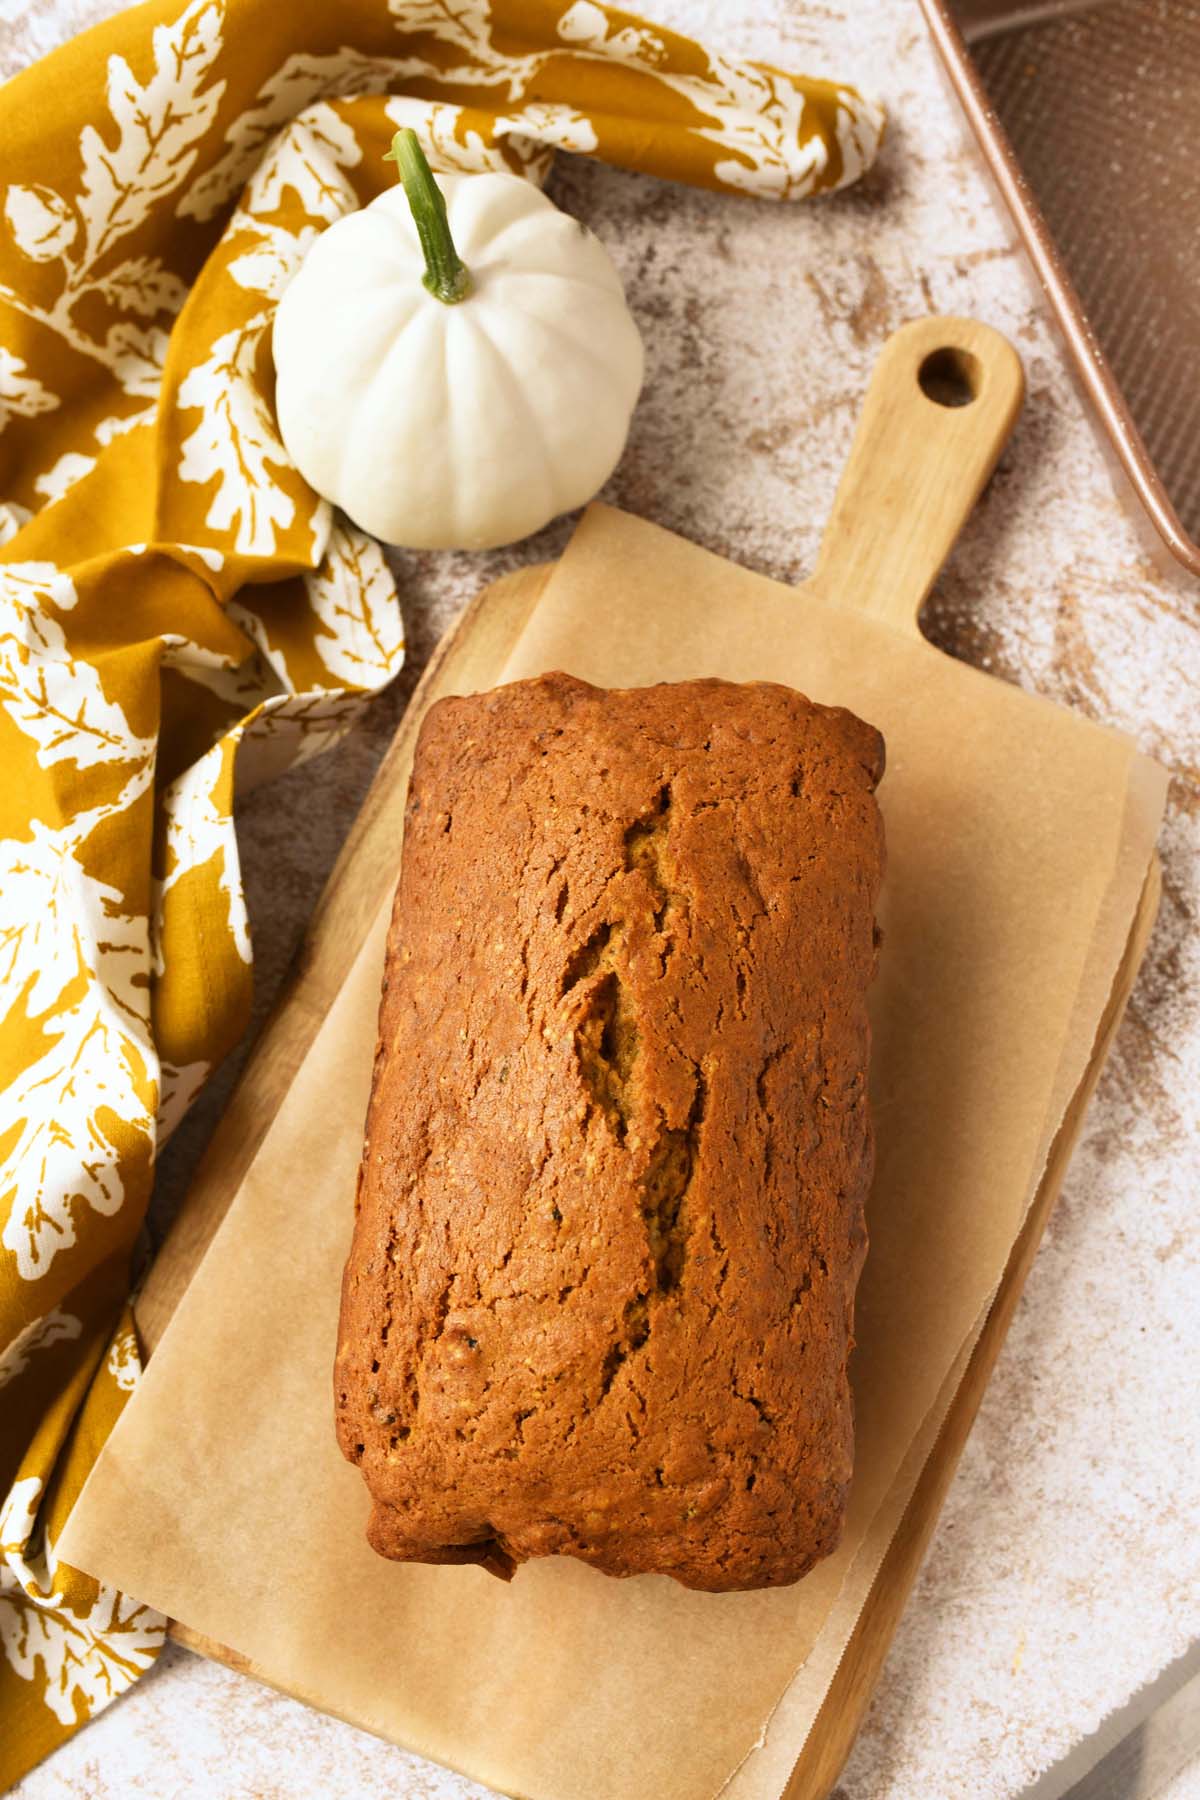 A golden-brown baked zucchini loaf.